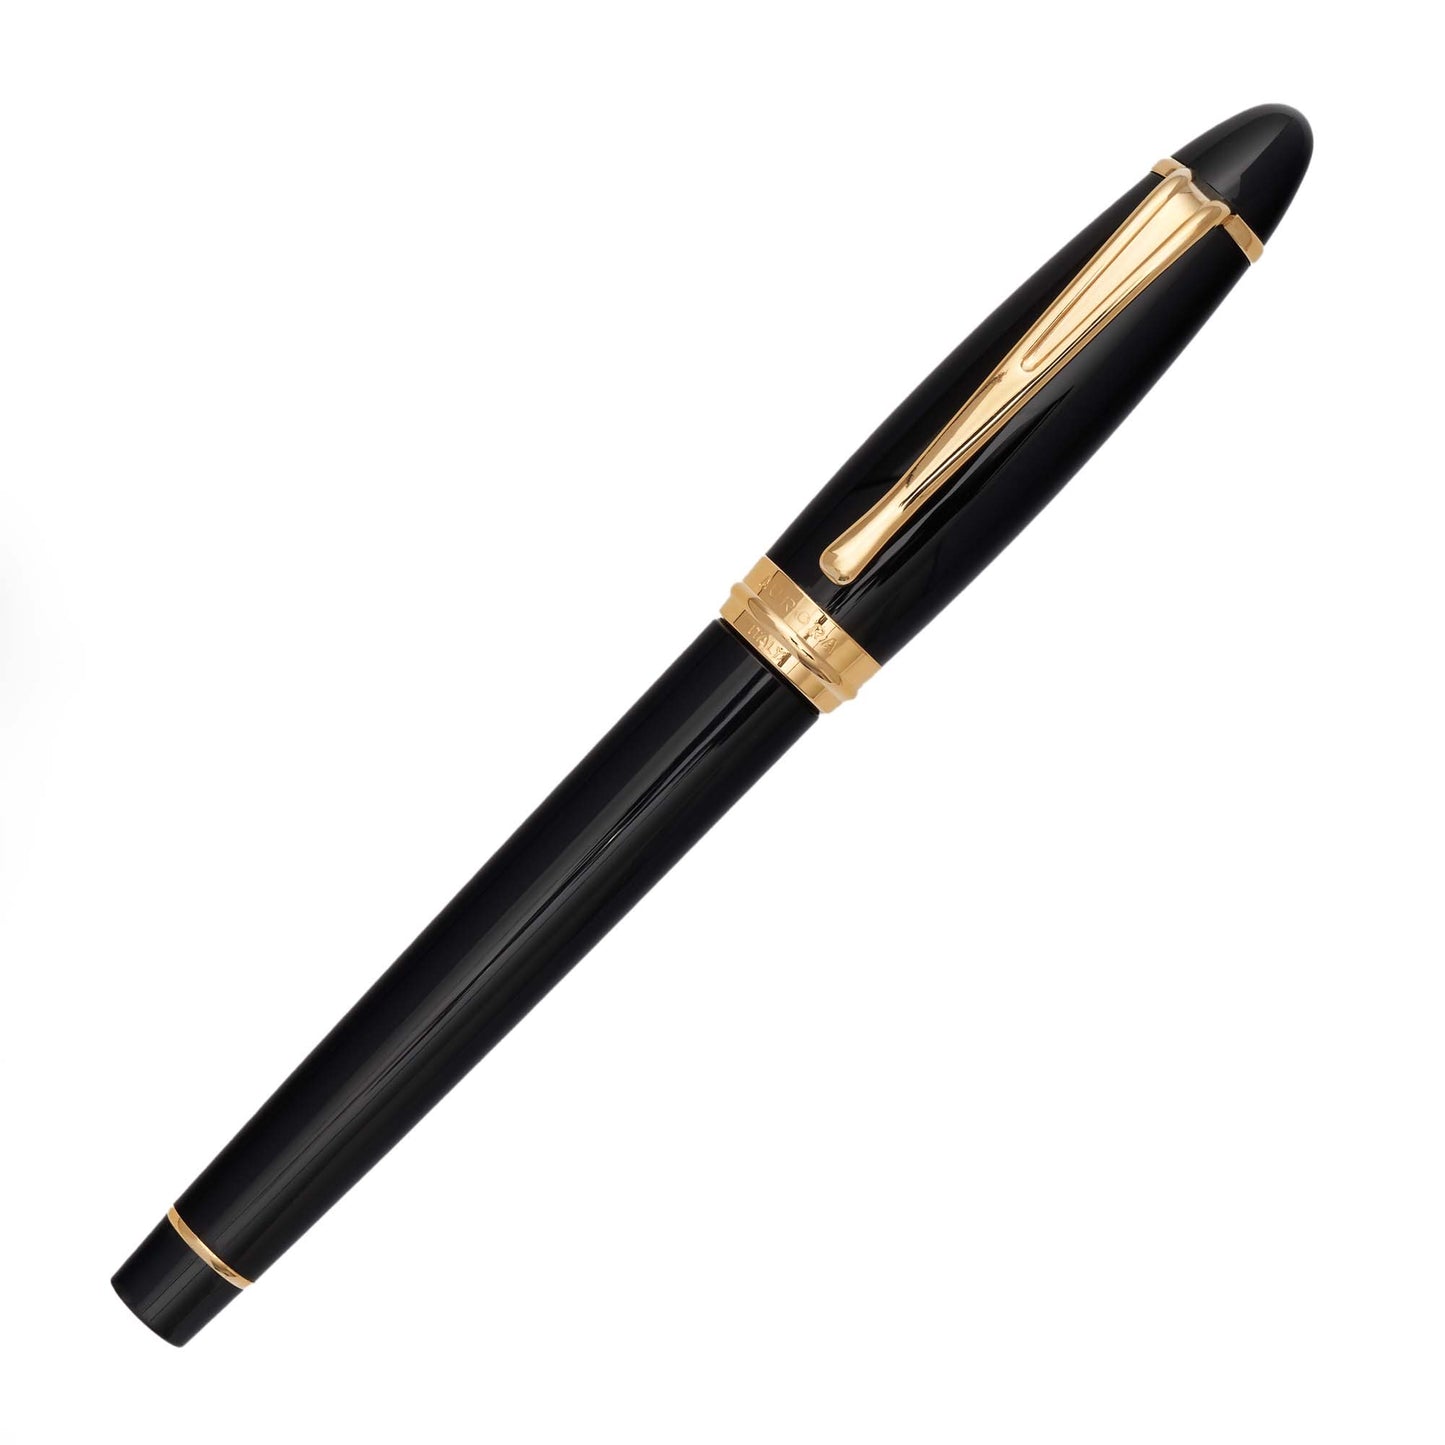 Aurora Ipsilon Fountain Pen Made in Italy Capped Black and Gold